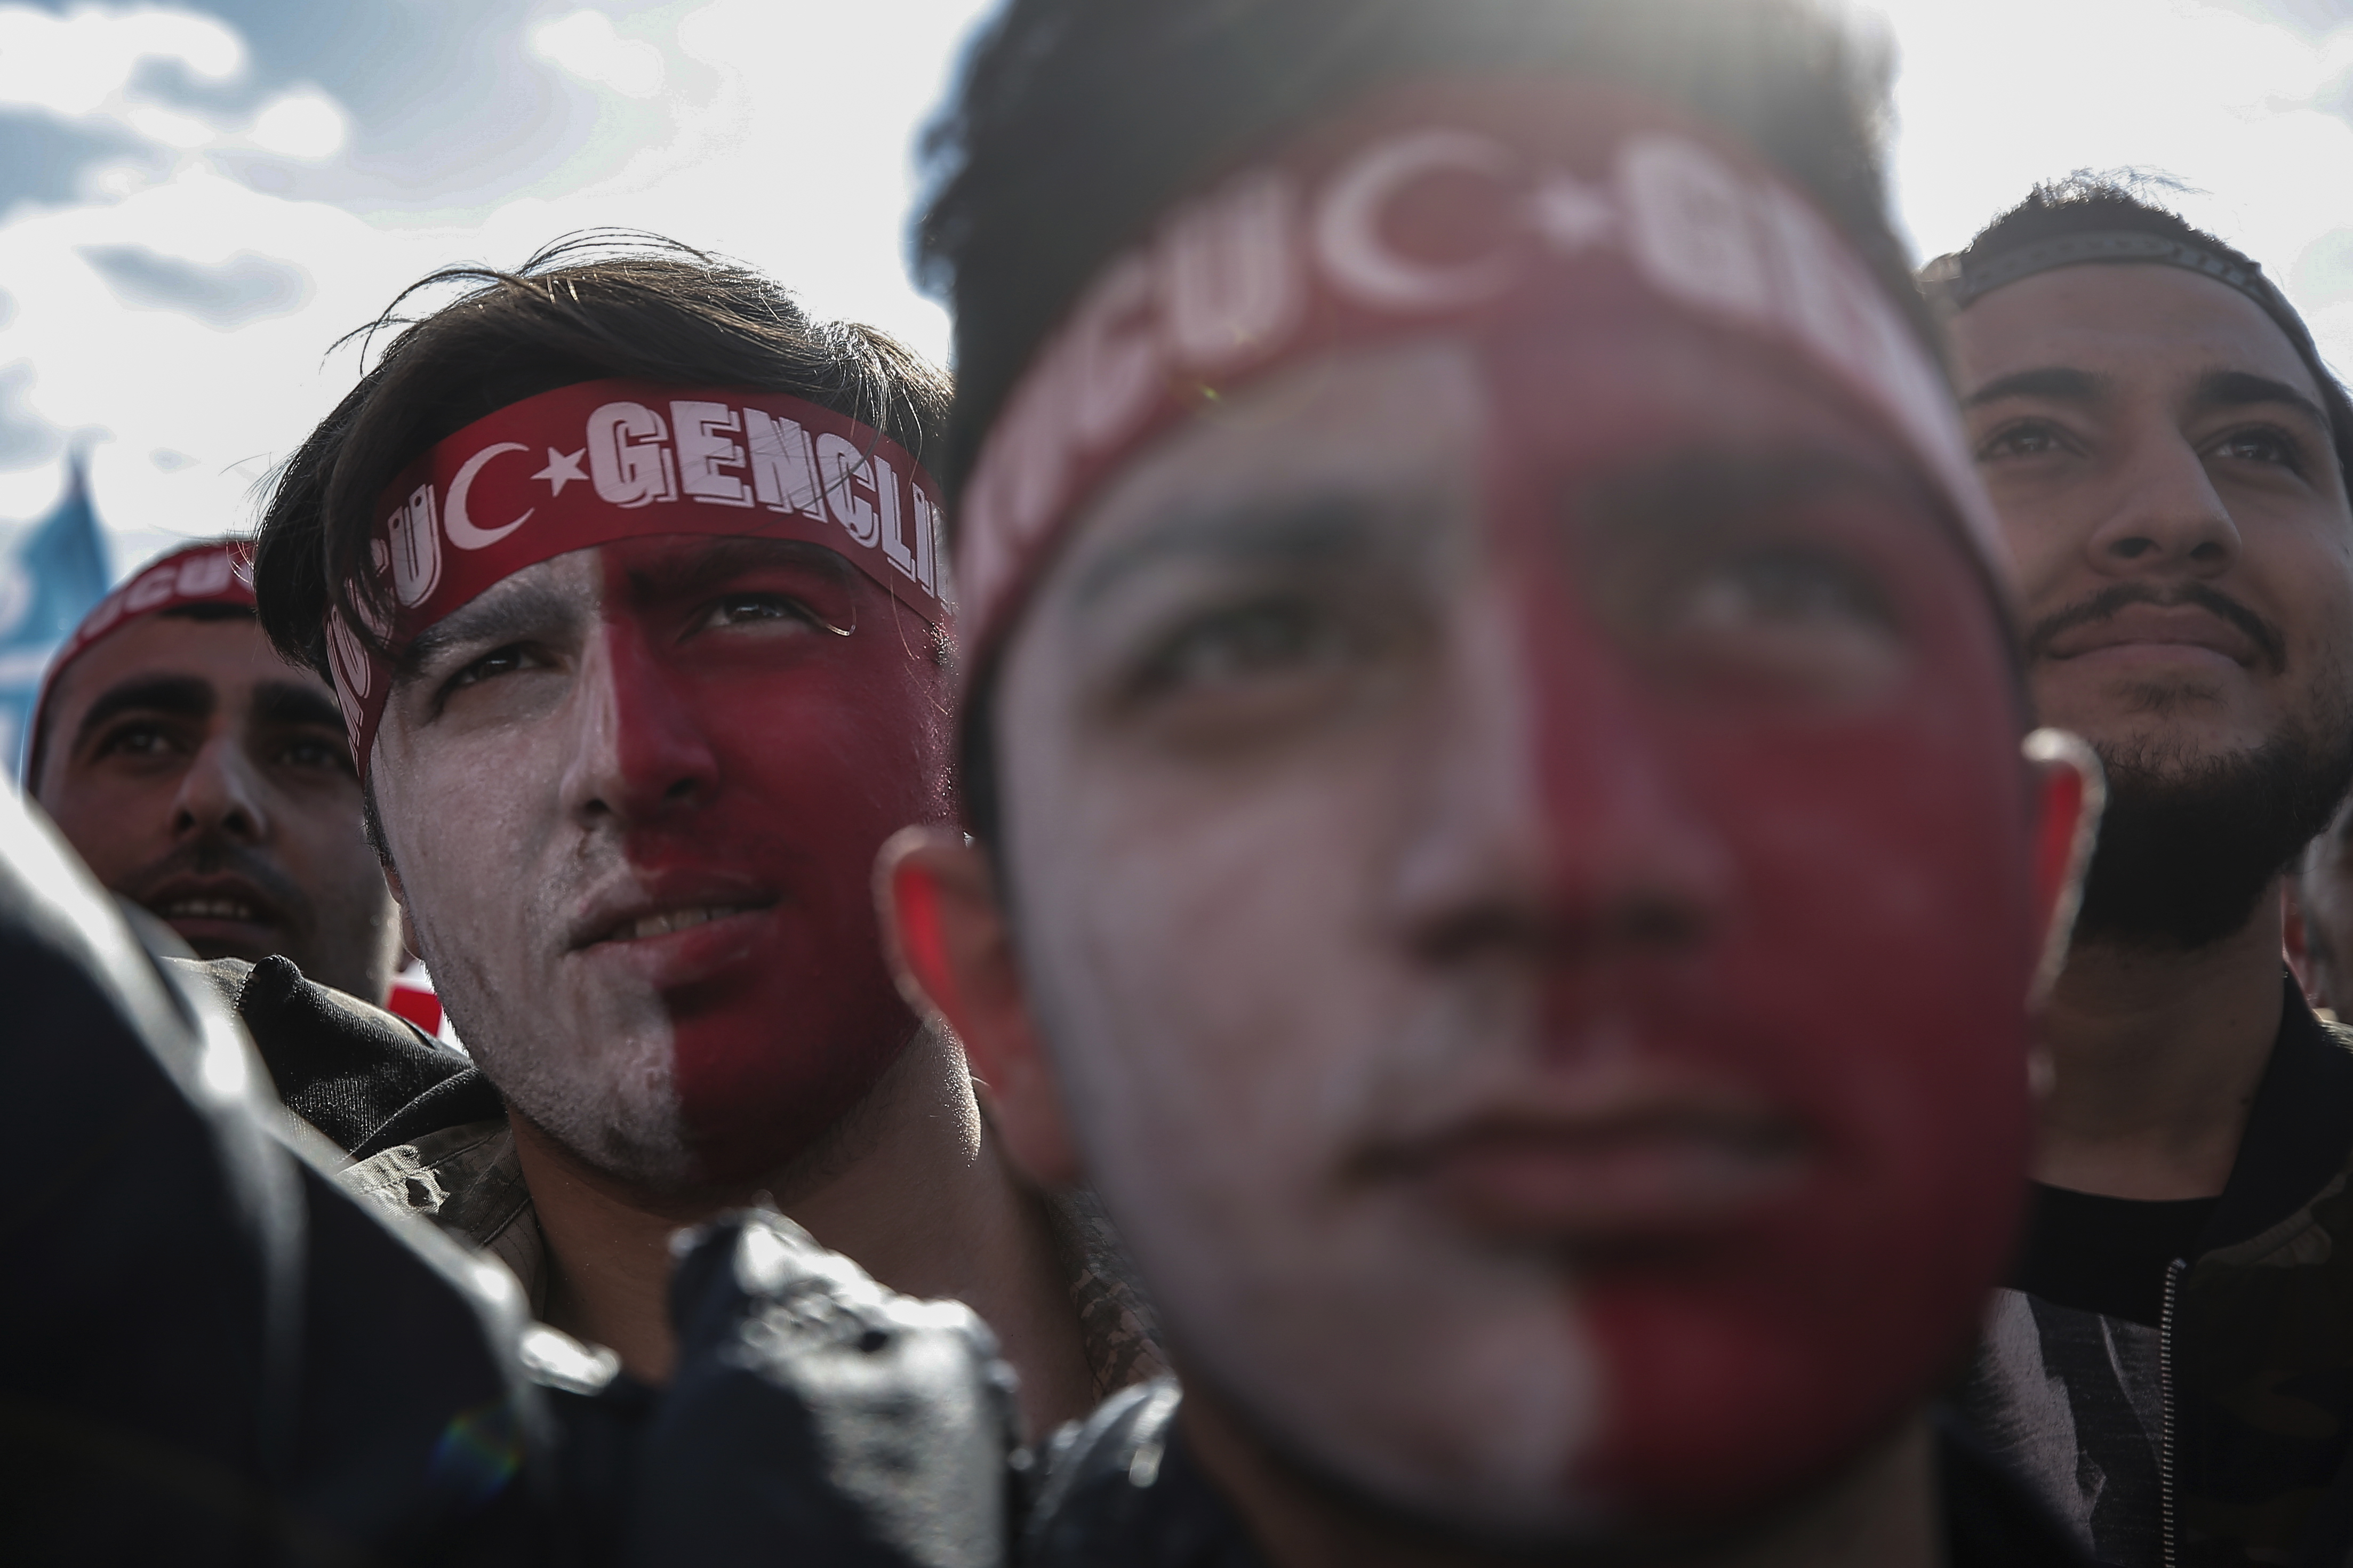 Supporters listen to Devlet Bahceli, the leader of Turkey's opposition Nationalist Movement Party, who supports President Recep Tayyip Erdogan, during a referendum rally in Istanbul, Sunday, April 9, 2017. Turkey is heading to a contentious April 16 referendum on constitutional reforms to expand Erdogan's powers.(AP Photo/Emrah Gurel)